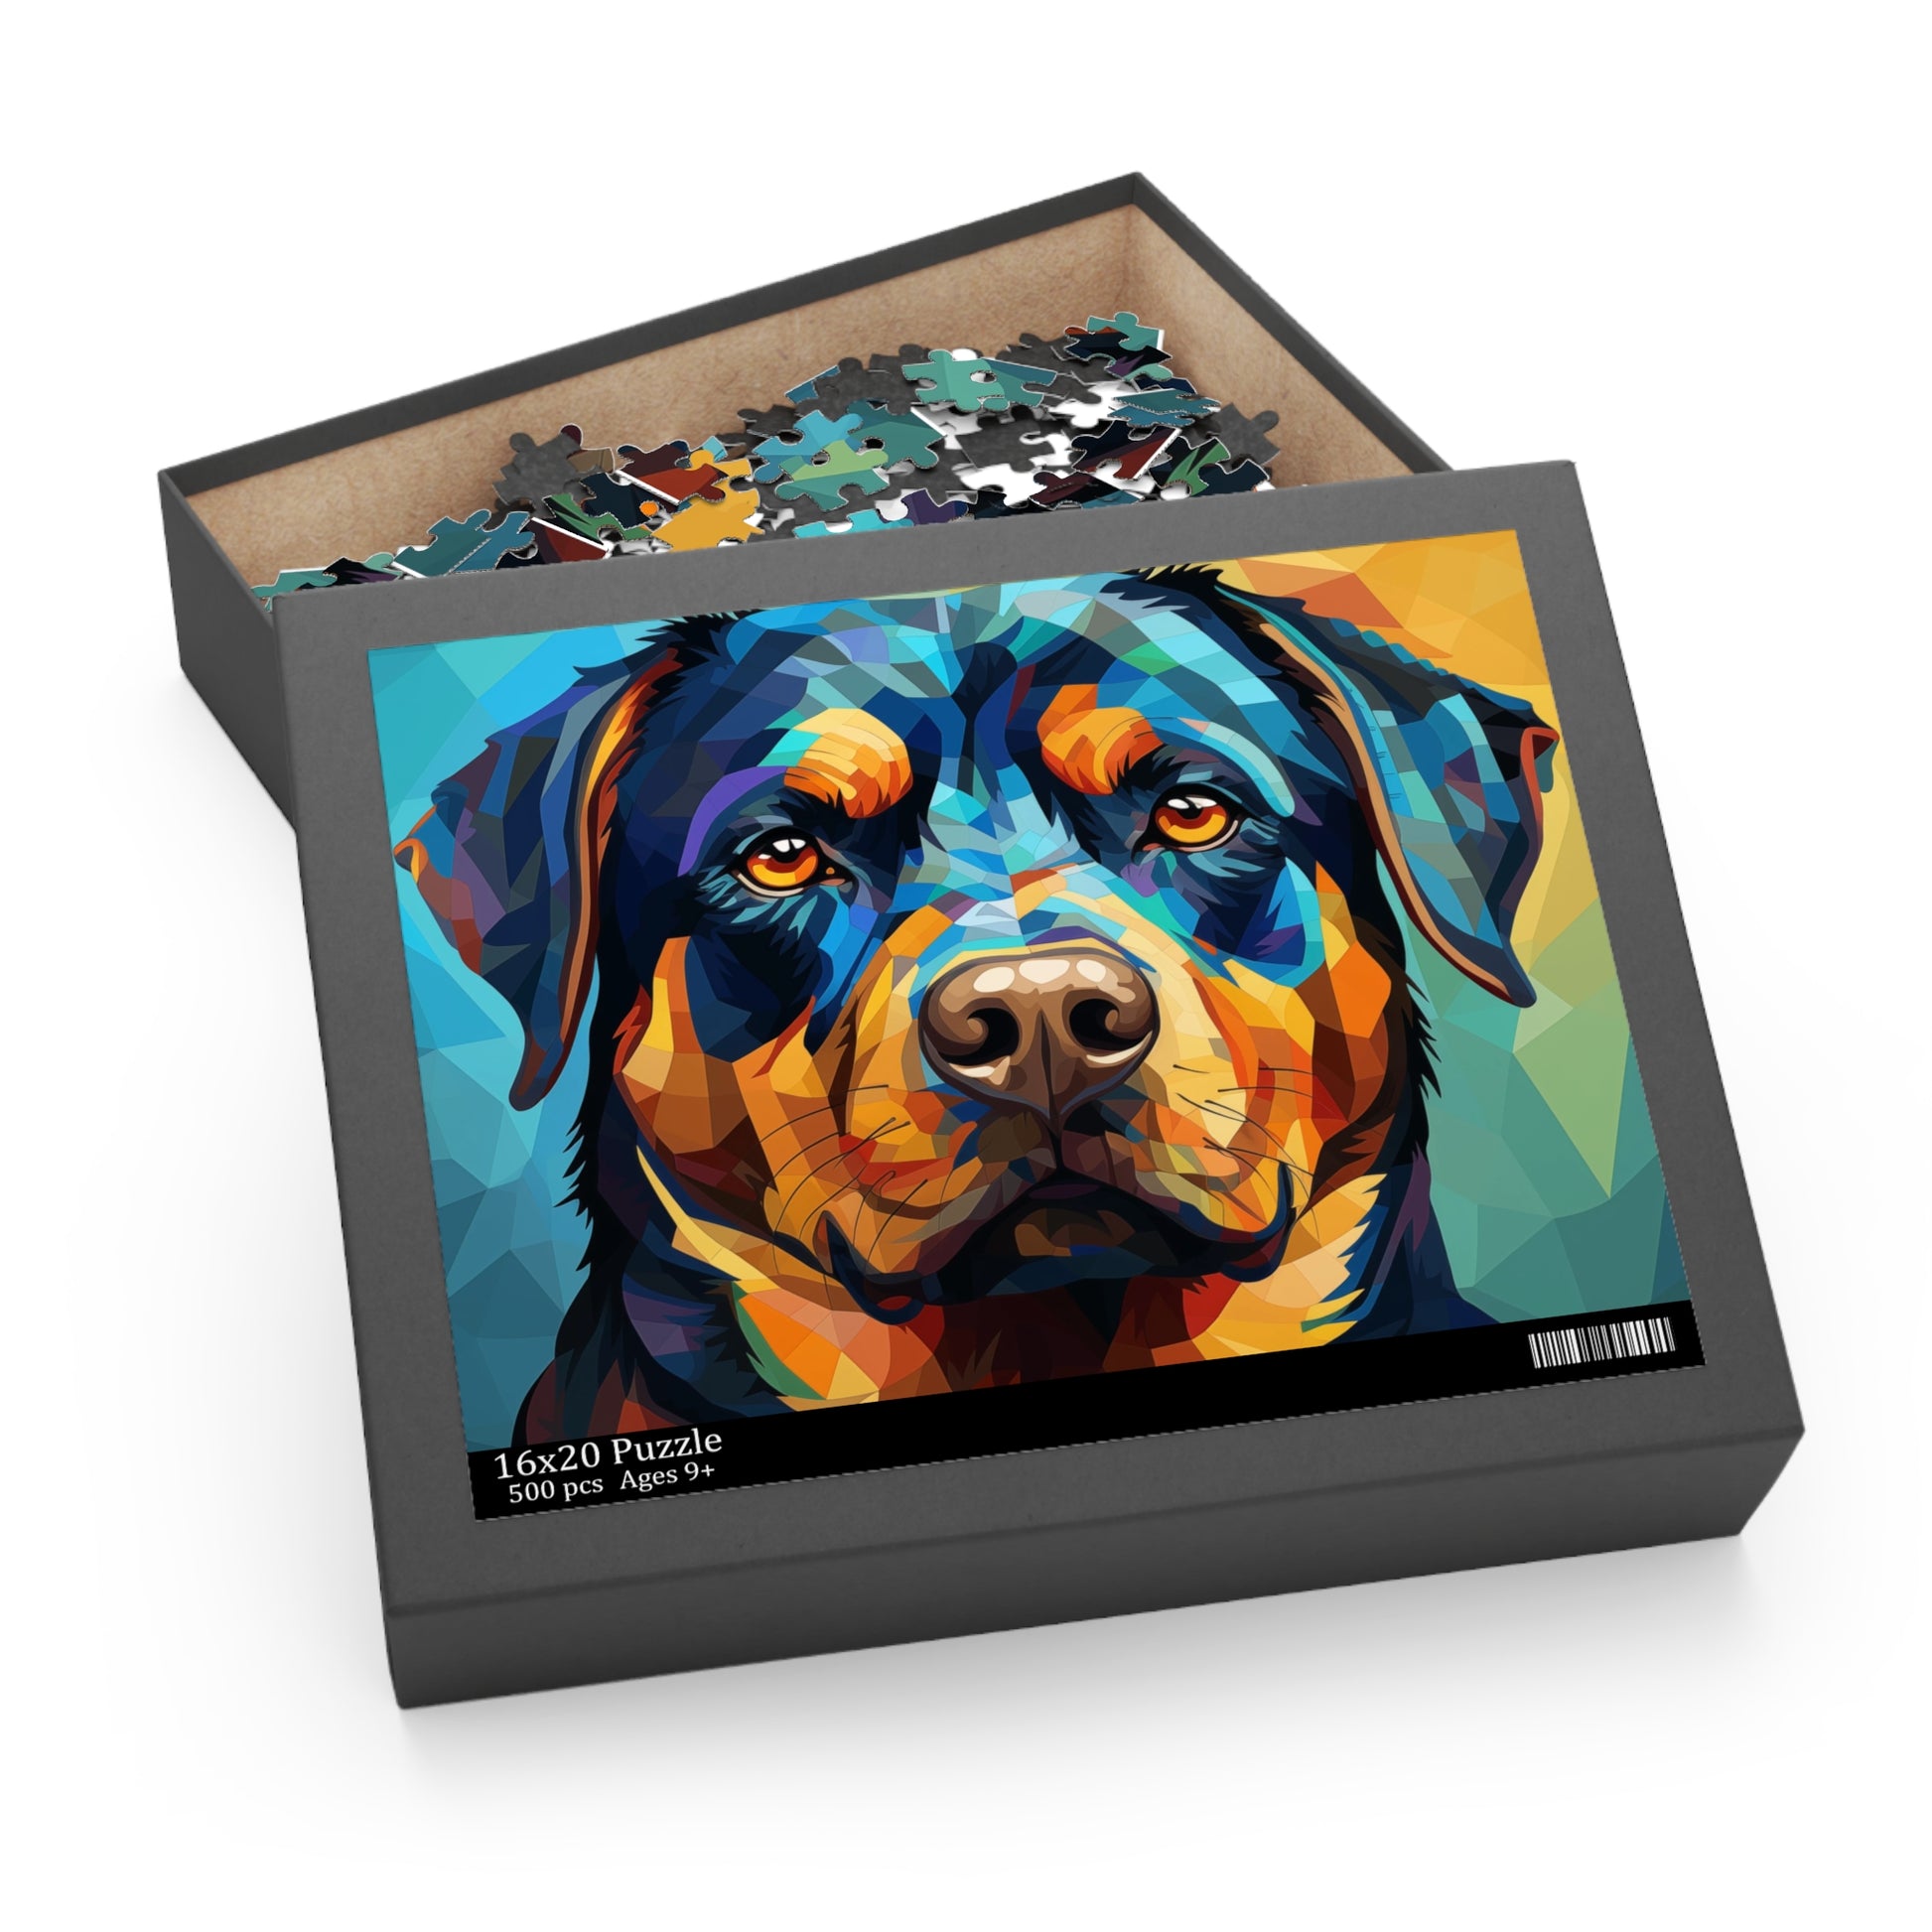 Watercolor Rottweiler Puzzle for Boys, Girls, Kids - Jigsaw Vibrant Oil Paint Dog Puzzle - Abstract Lover Gift - Rottweiler Trippy Puzzle Adult Birthday Business Jigsaw Puzzle Gift for Him Funny Humorous Indoor Outdoor Game Gift For Her Online-4